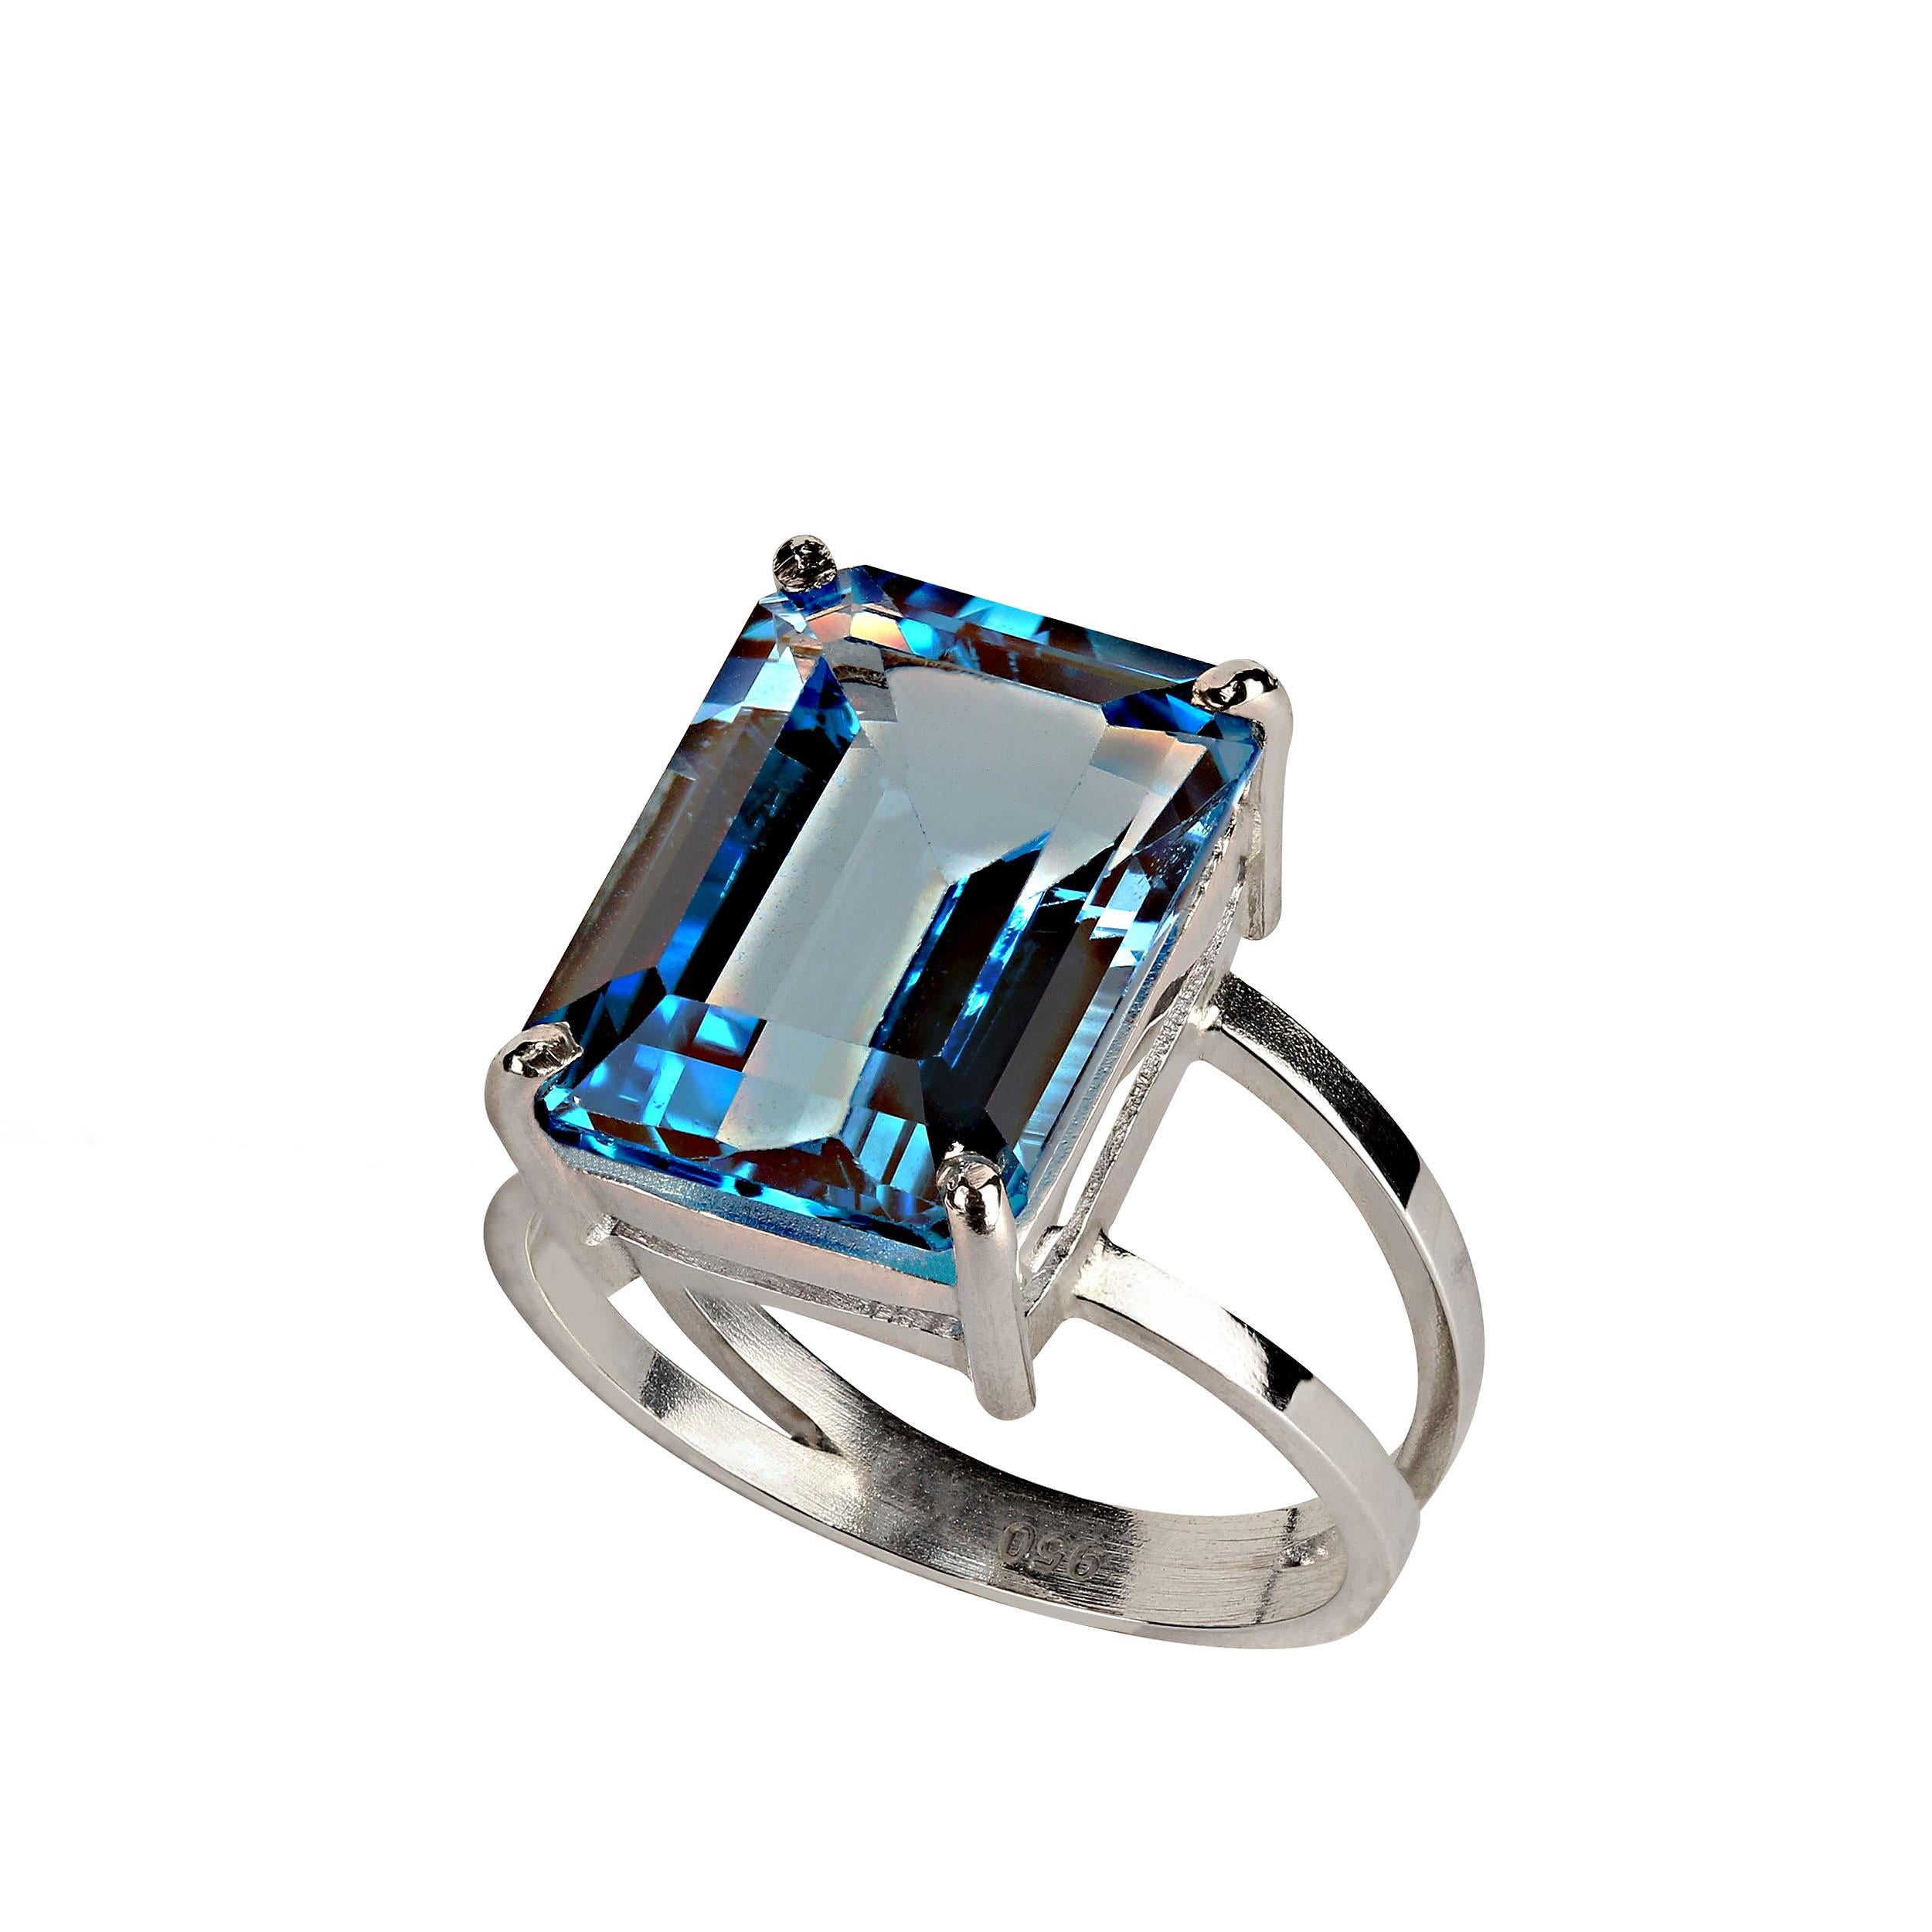 AJD Elegant Emerald Cut Swiss Blue Topaz, 11.74 Carat, in Sterling Silver Ring In New Condition For Sale In Raleigh, NC